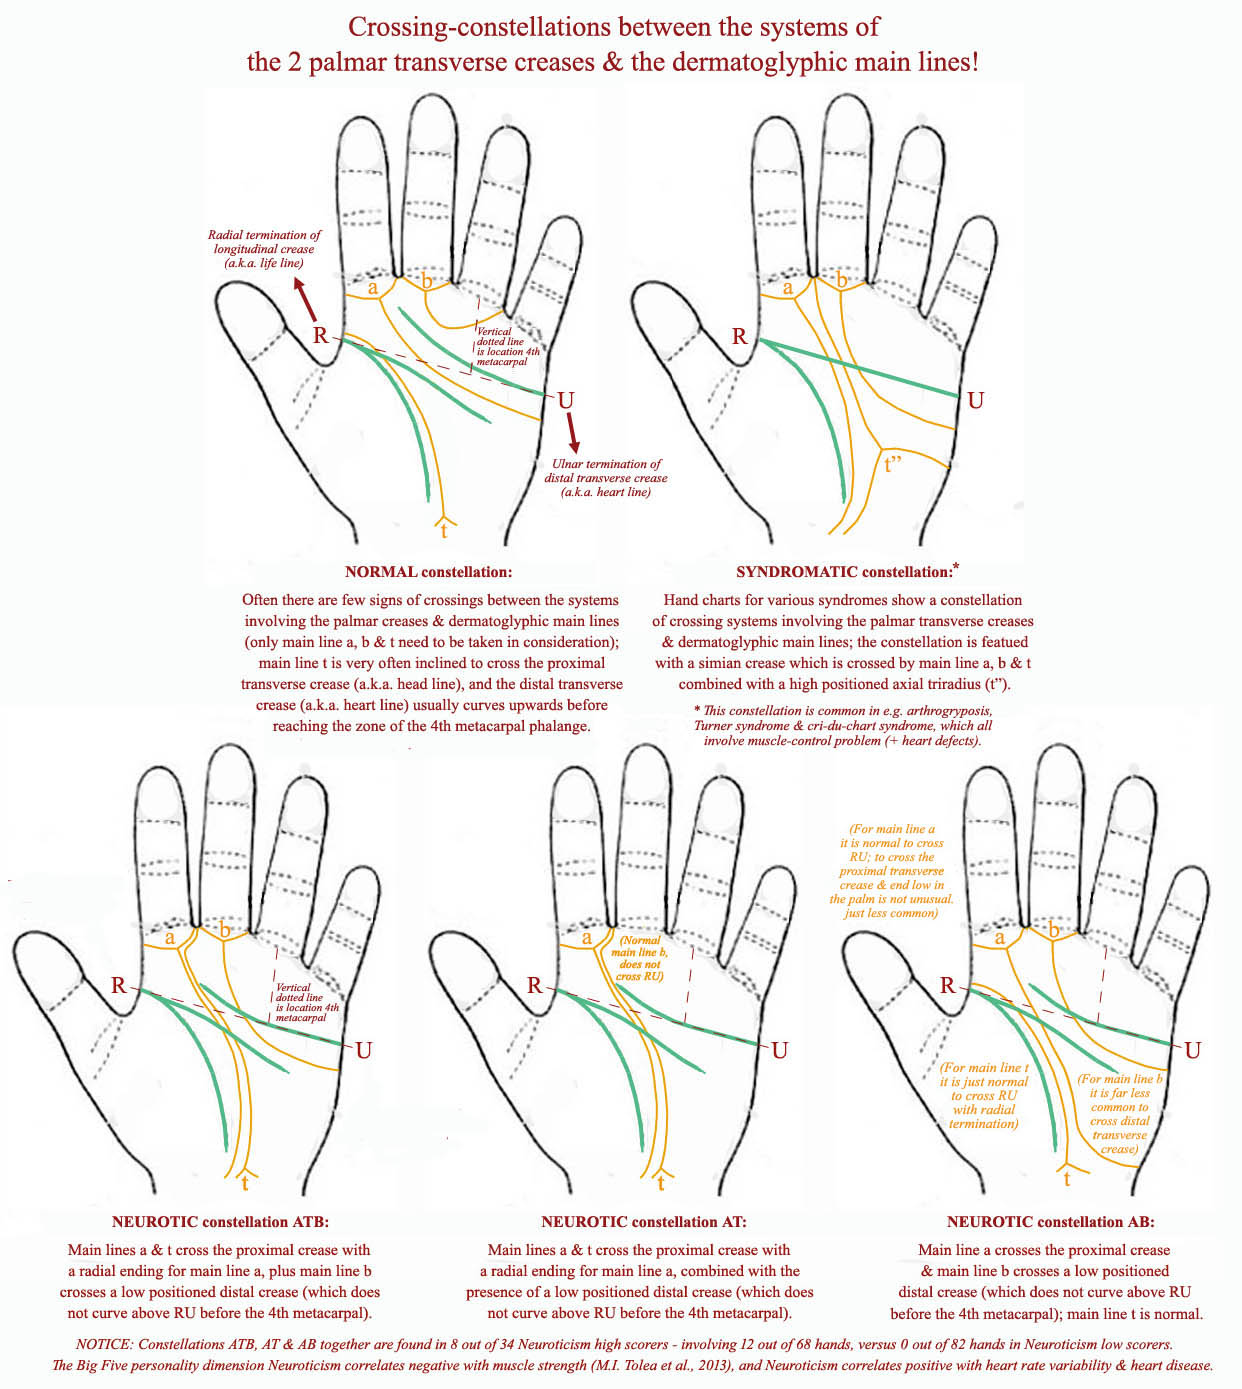 Crossing-constellations between the systems of the 2 palmar transverse creases & the dermatoglyphic main lines.